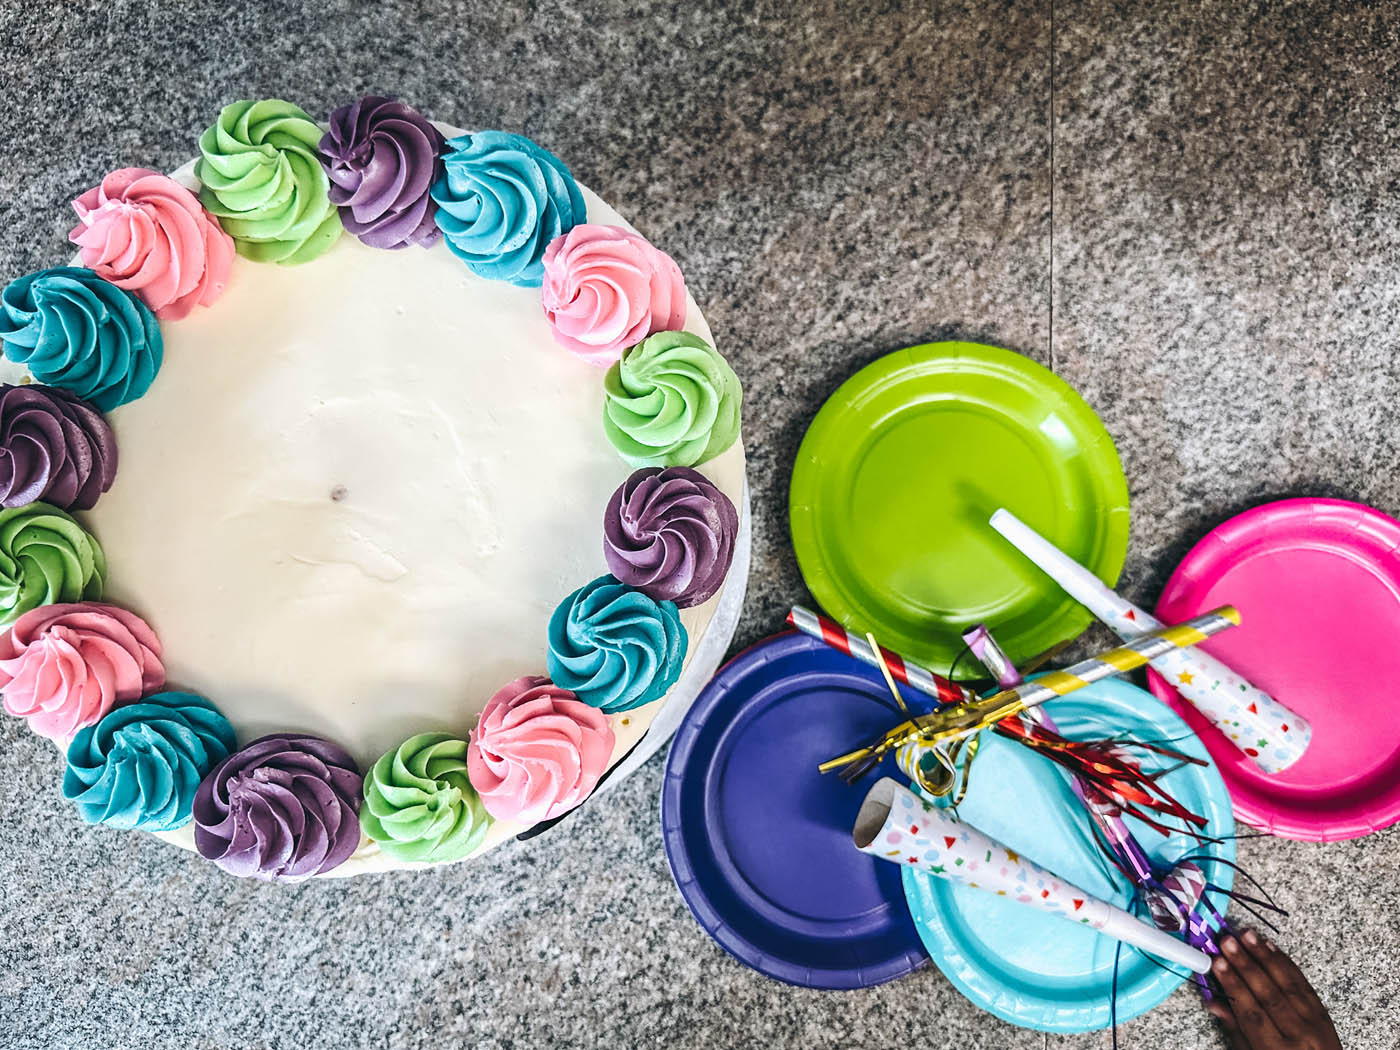 A cake and party supplies - party utensil supplies provided at Romp n' Roll toddler birthday venues in Pittsburgh, PA.